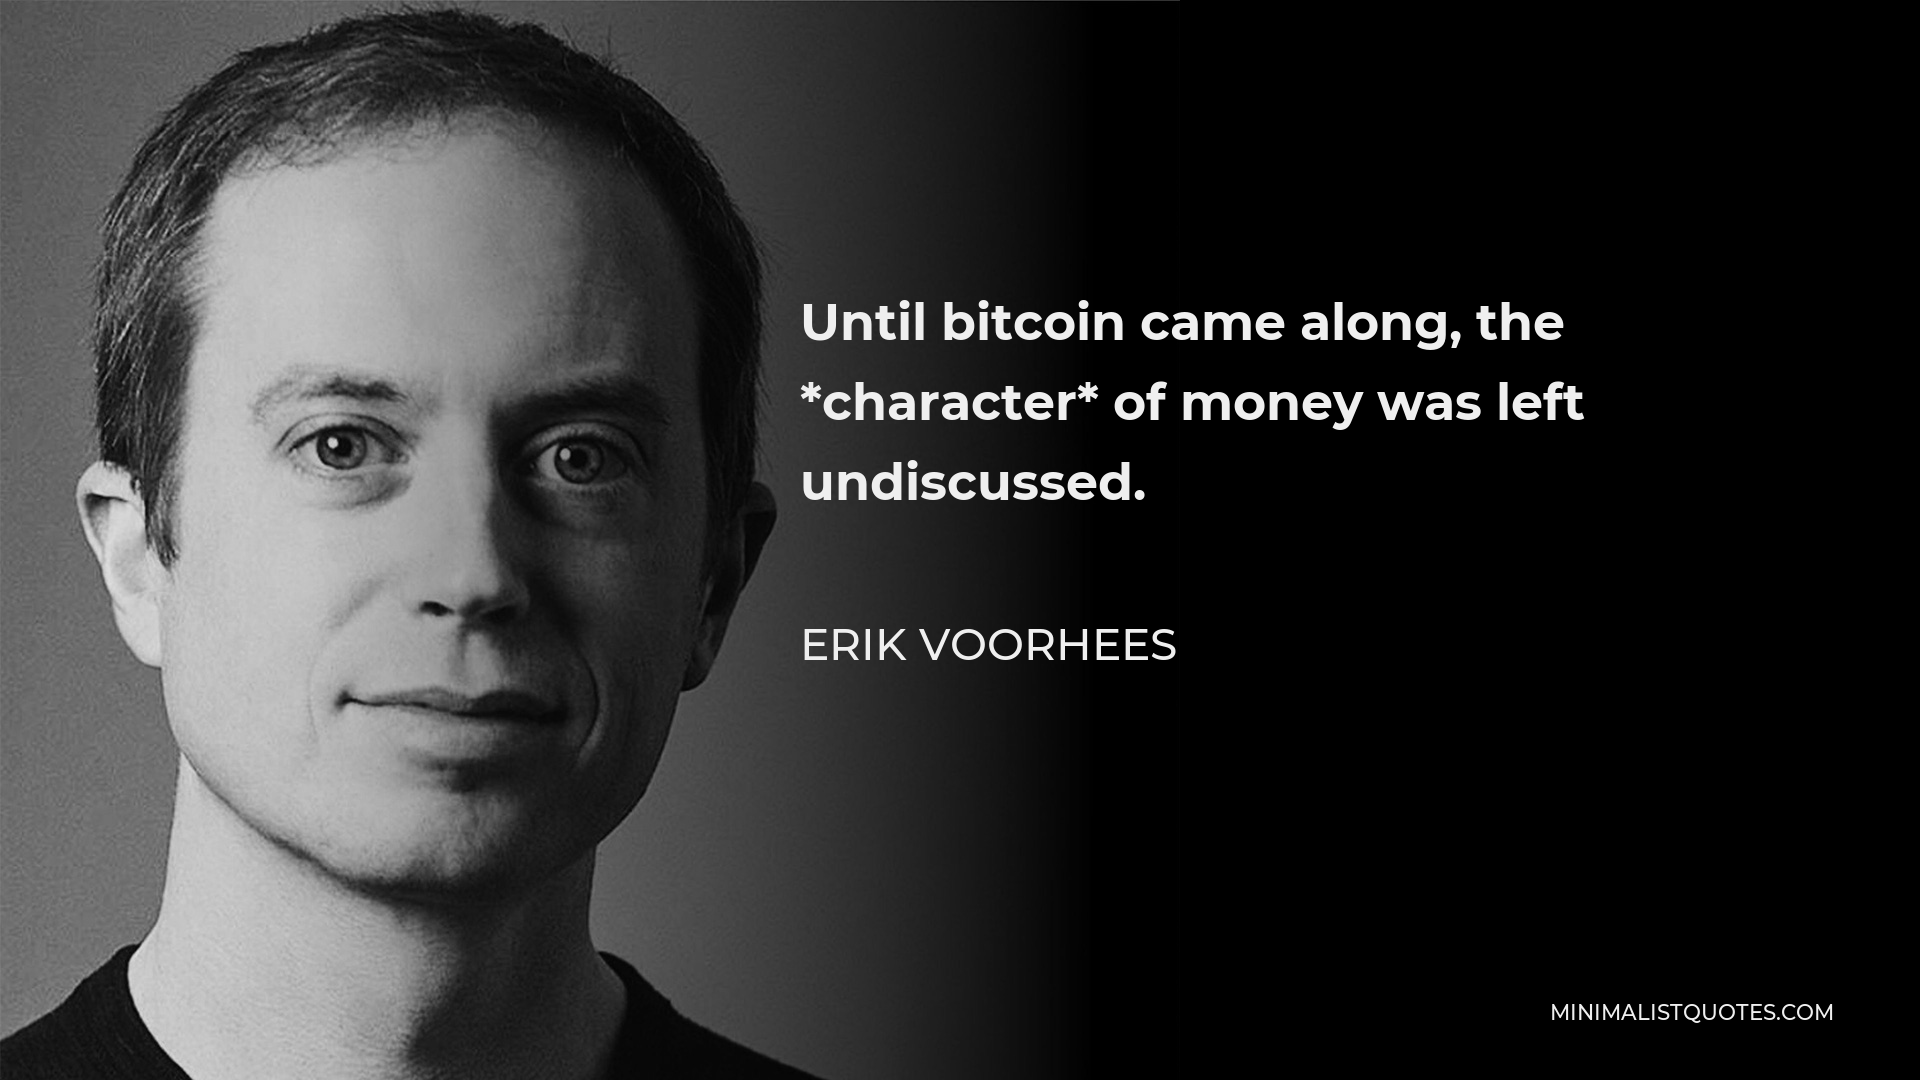 Erik Voorhees Quote - Until bitcoin came along, the *character* of money was left undiscussed.